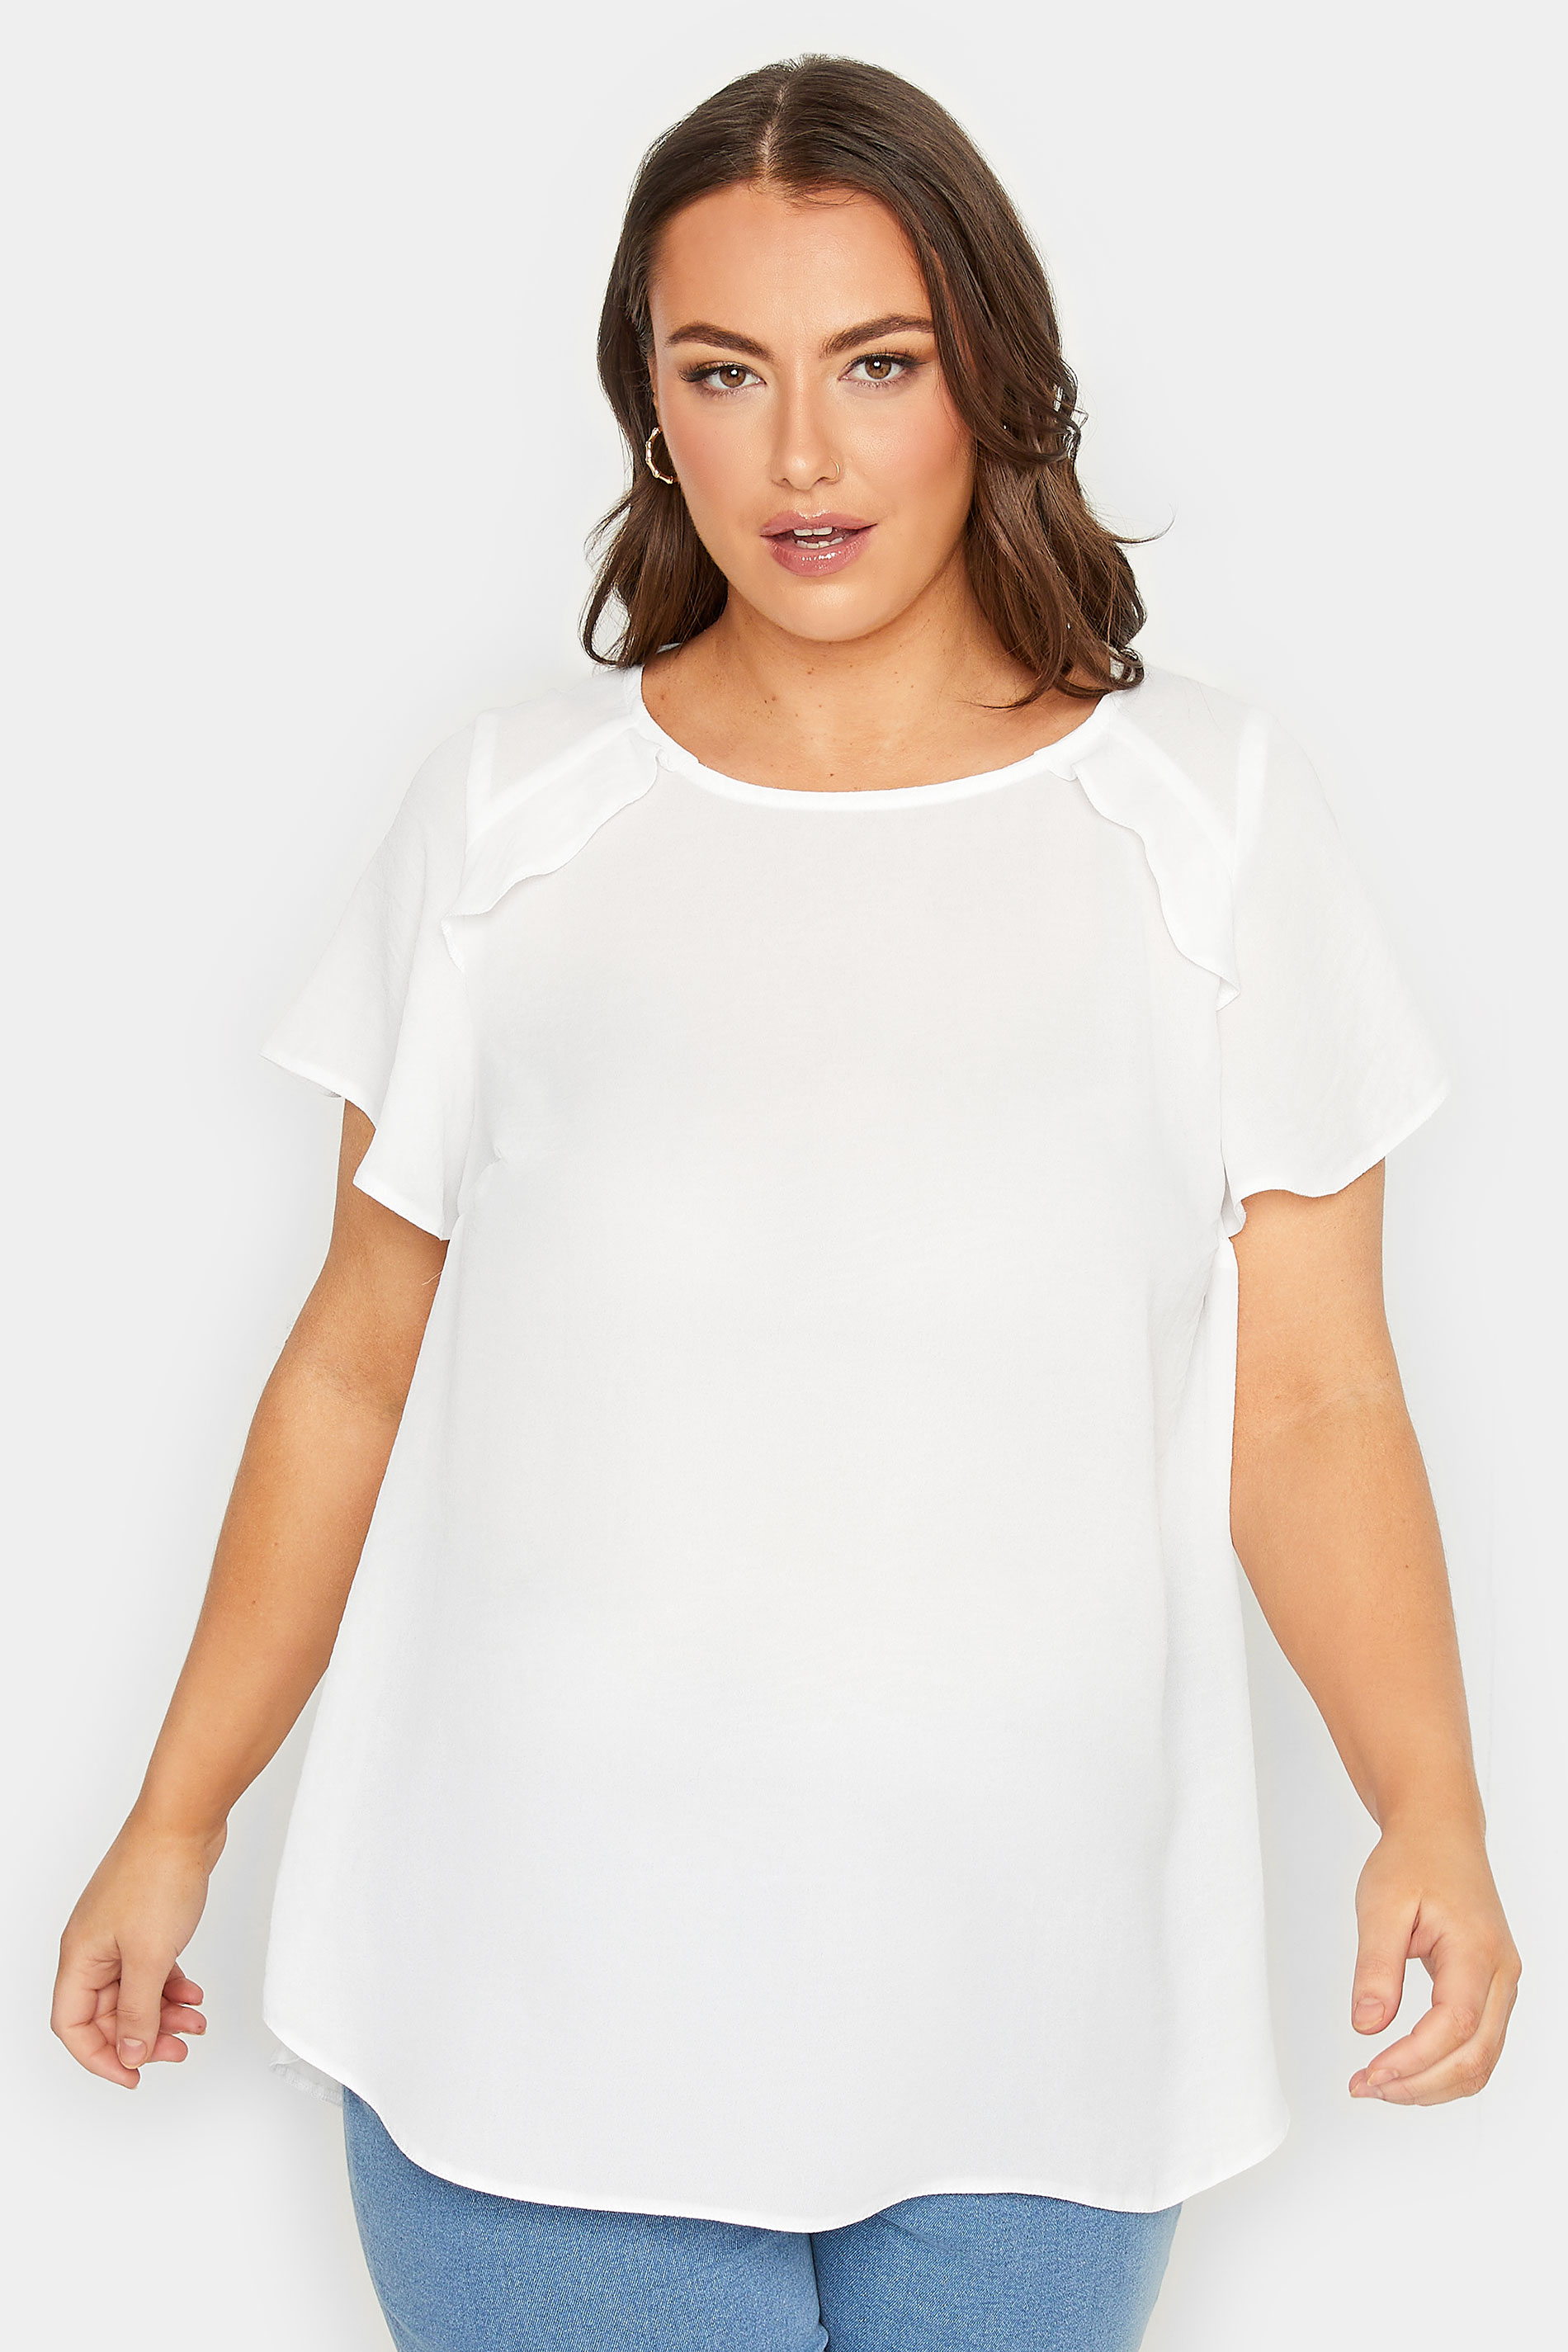 YOURS Plus Size White Frill Short Sleeve Blouse